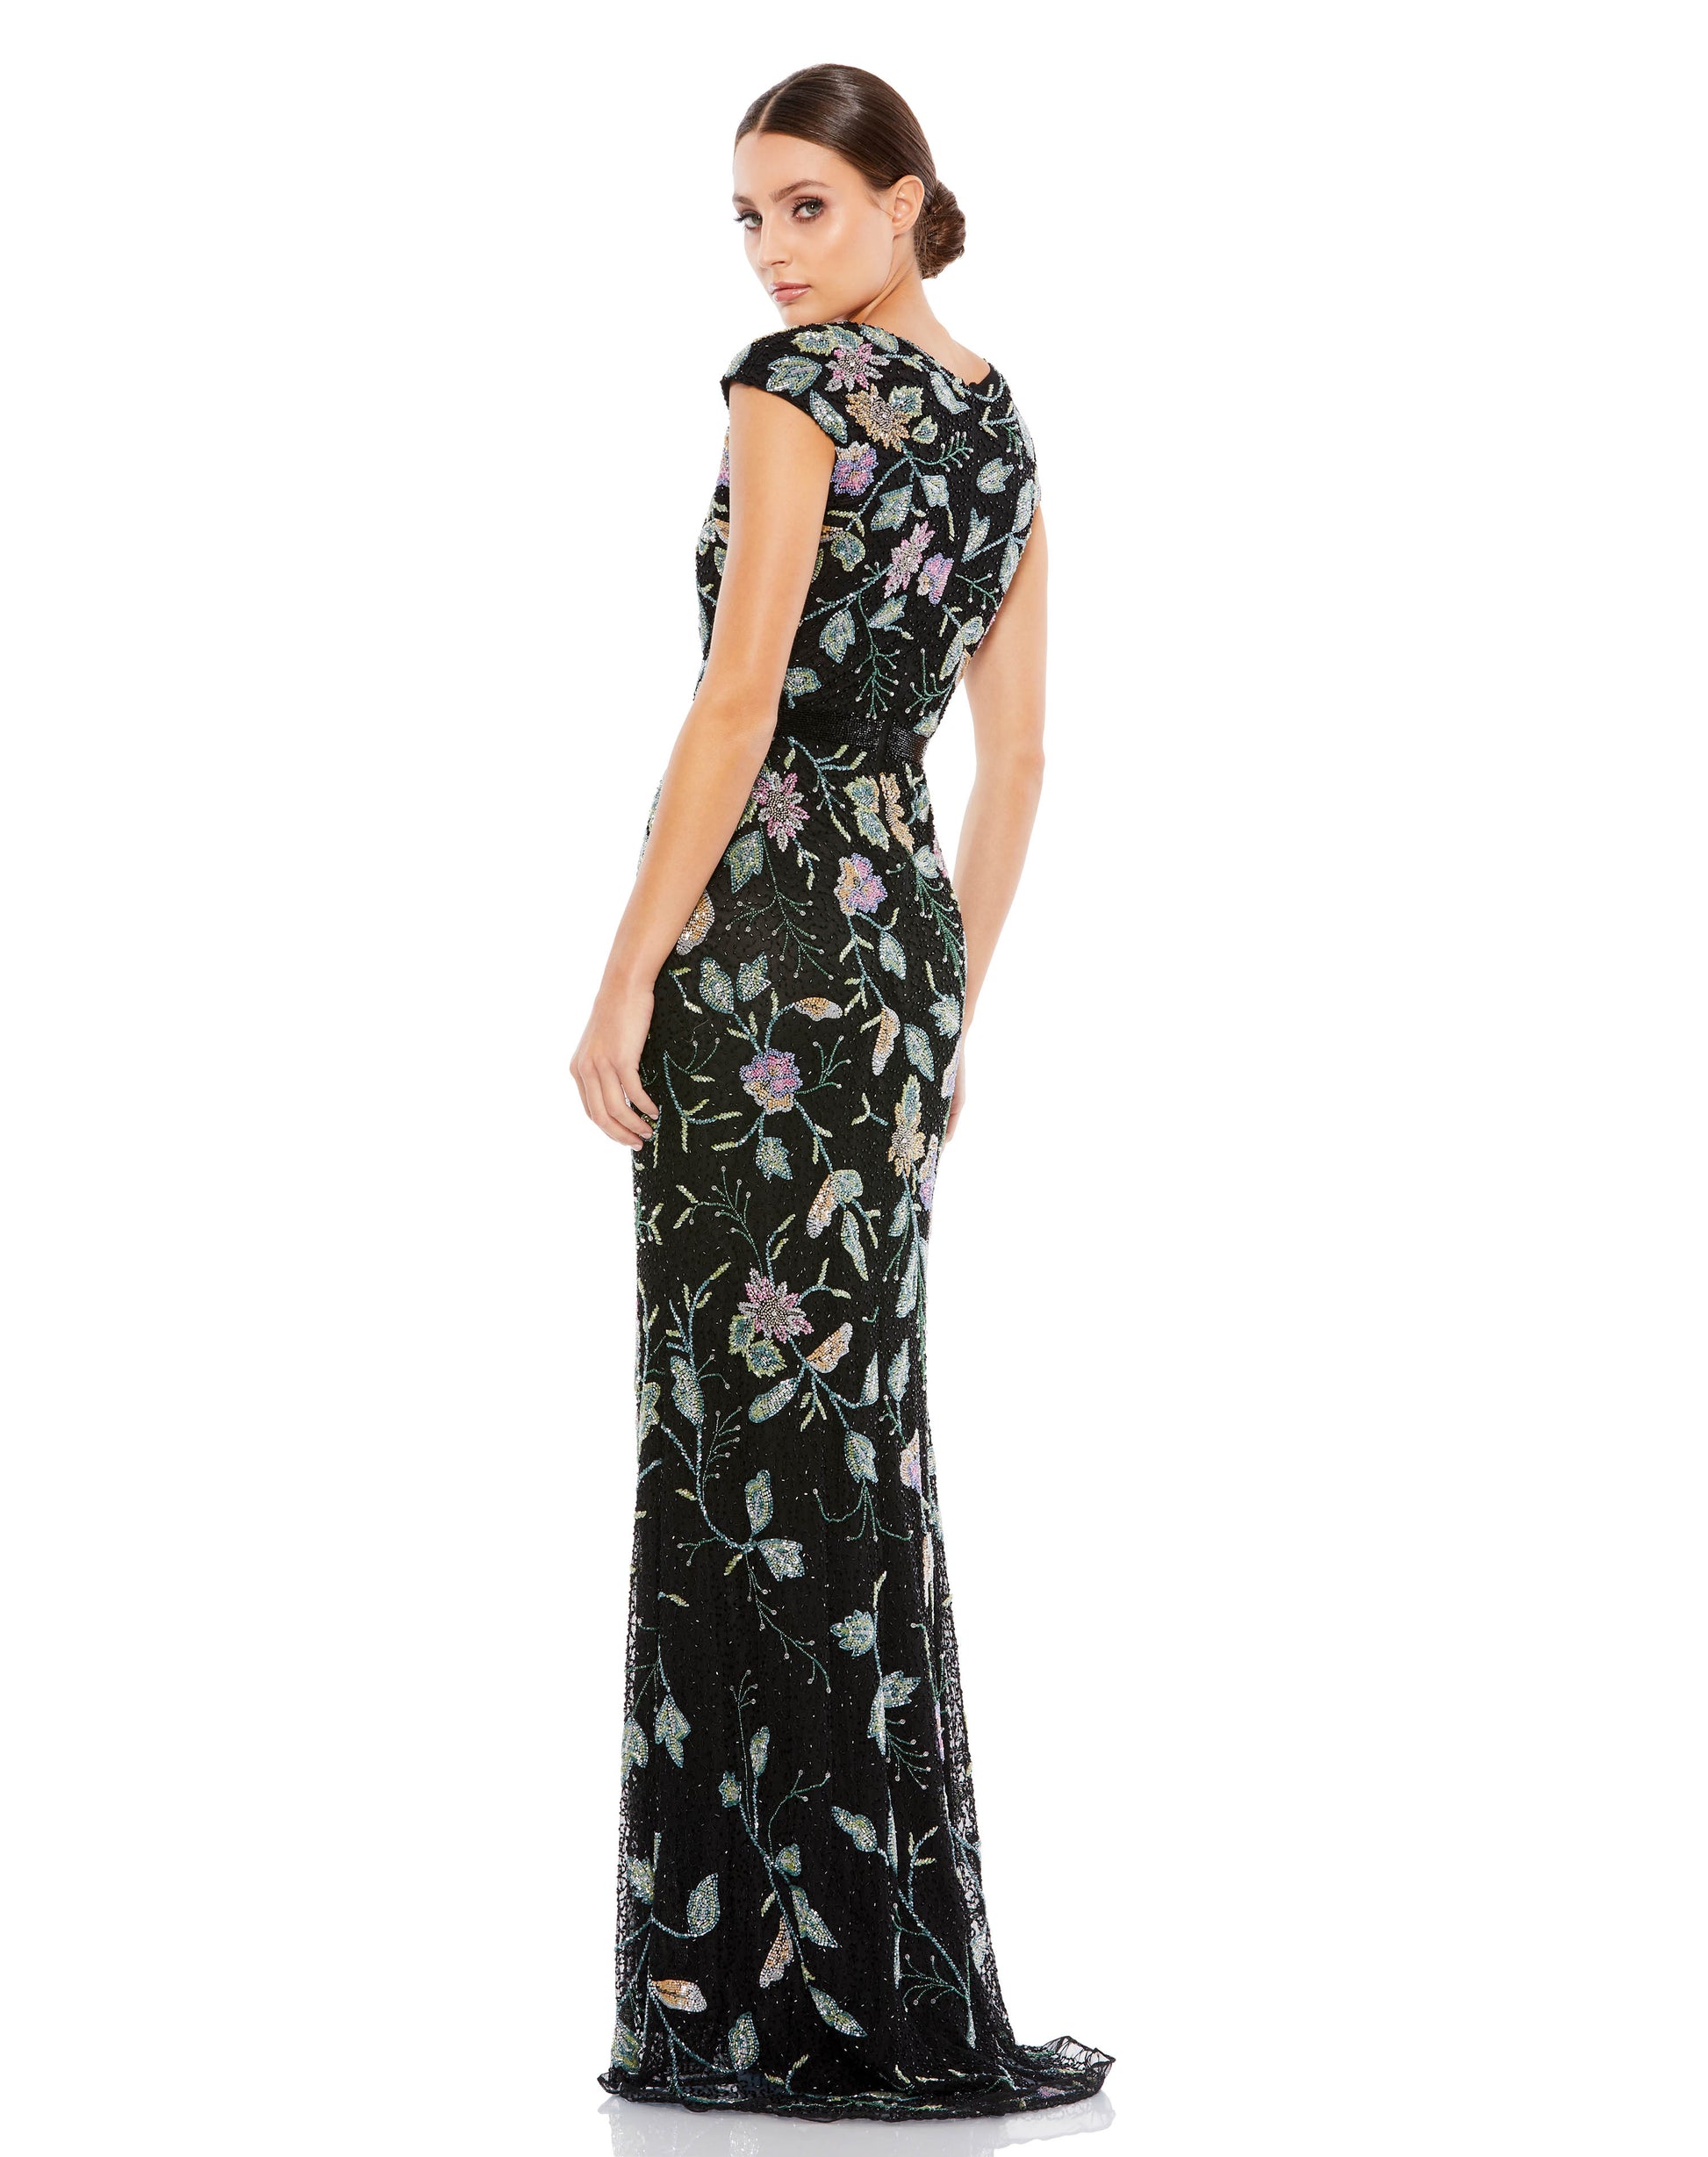 Stunning full-length floral beaded gown with cap sleeves, a high neckline, and a subtle train. The natural waist is accented with a hand-beaded belt. Mac Duggal Fully Lined Back Zipper 100% Polyester Cap Sleeve Maxi & Floor Length High Neck Style #5229